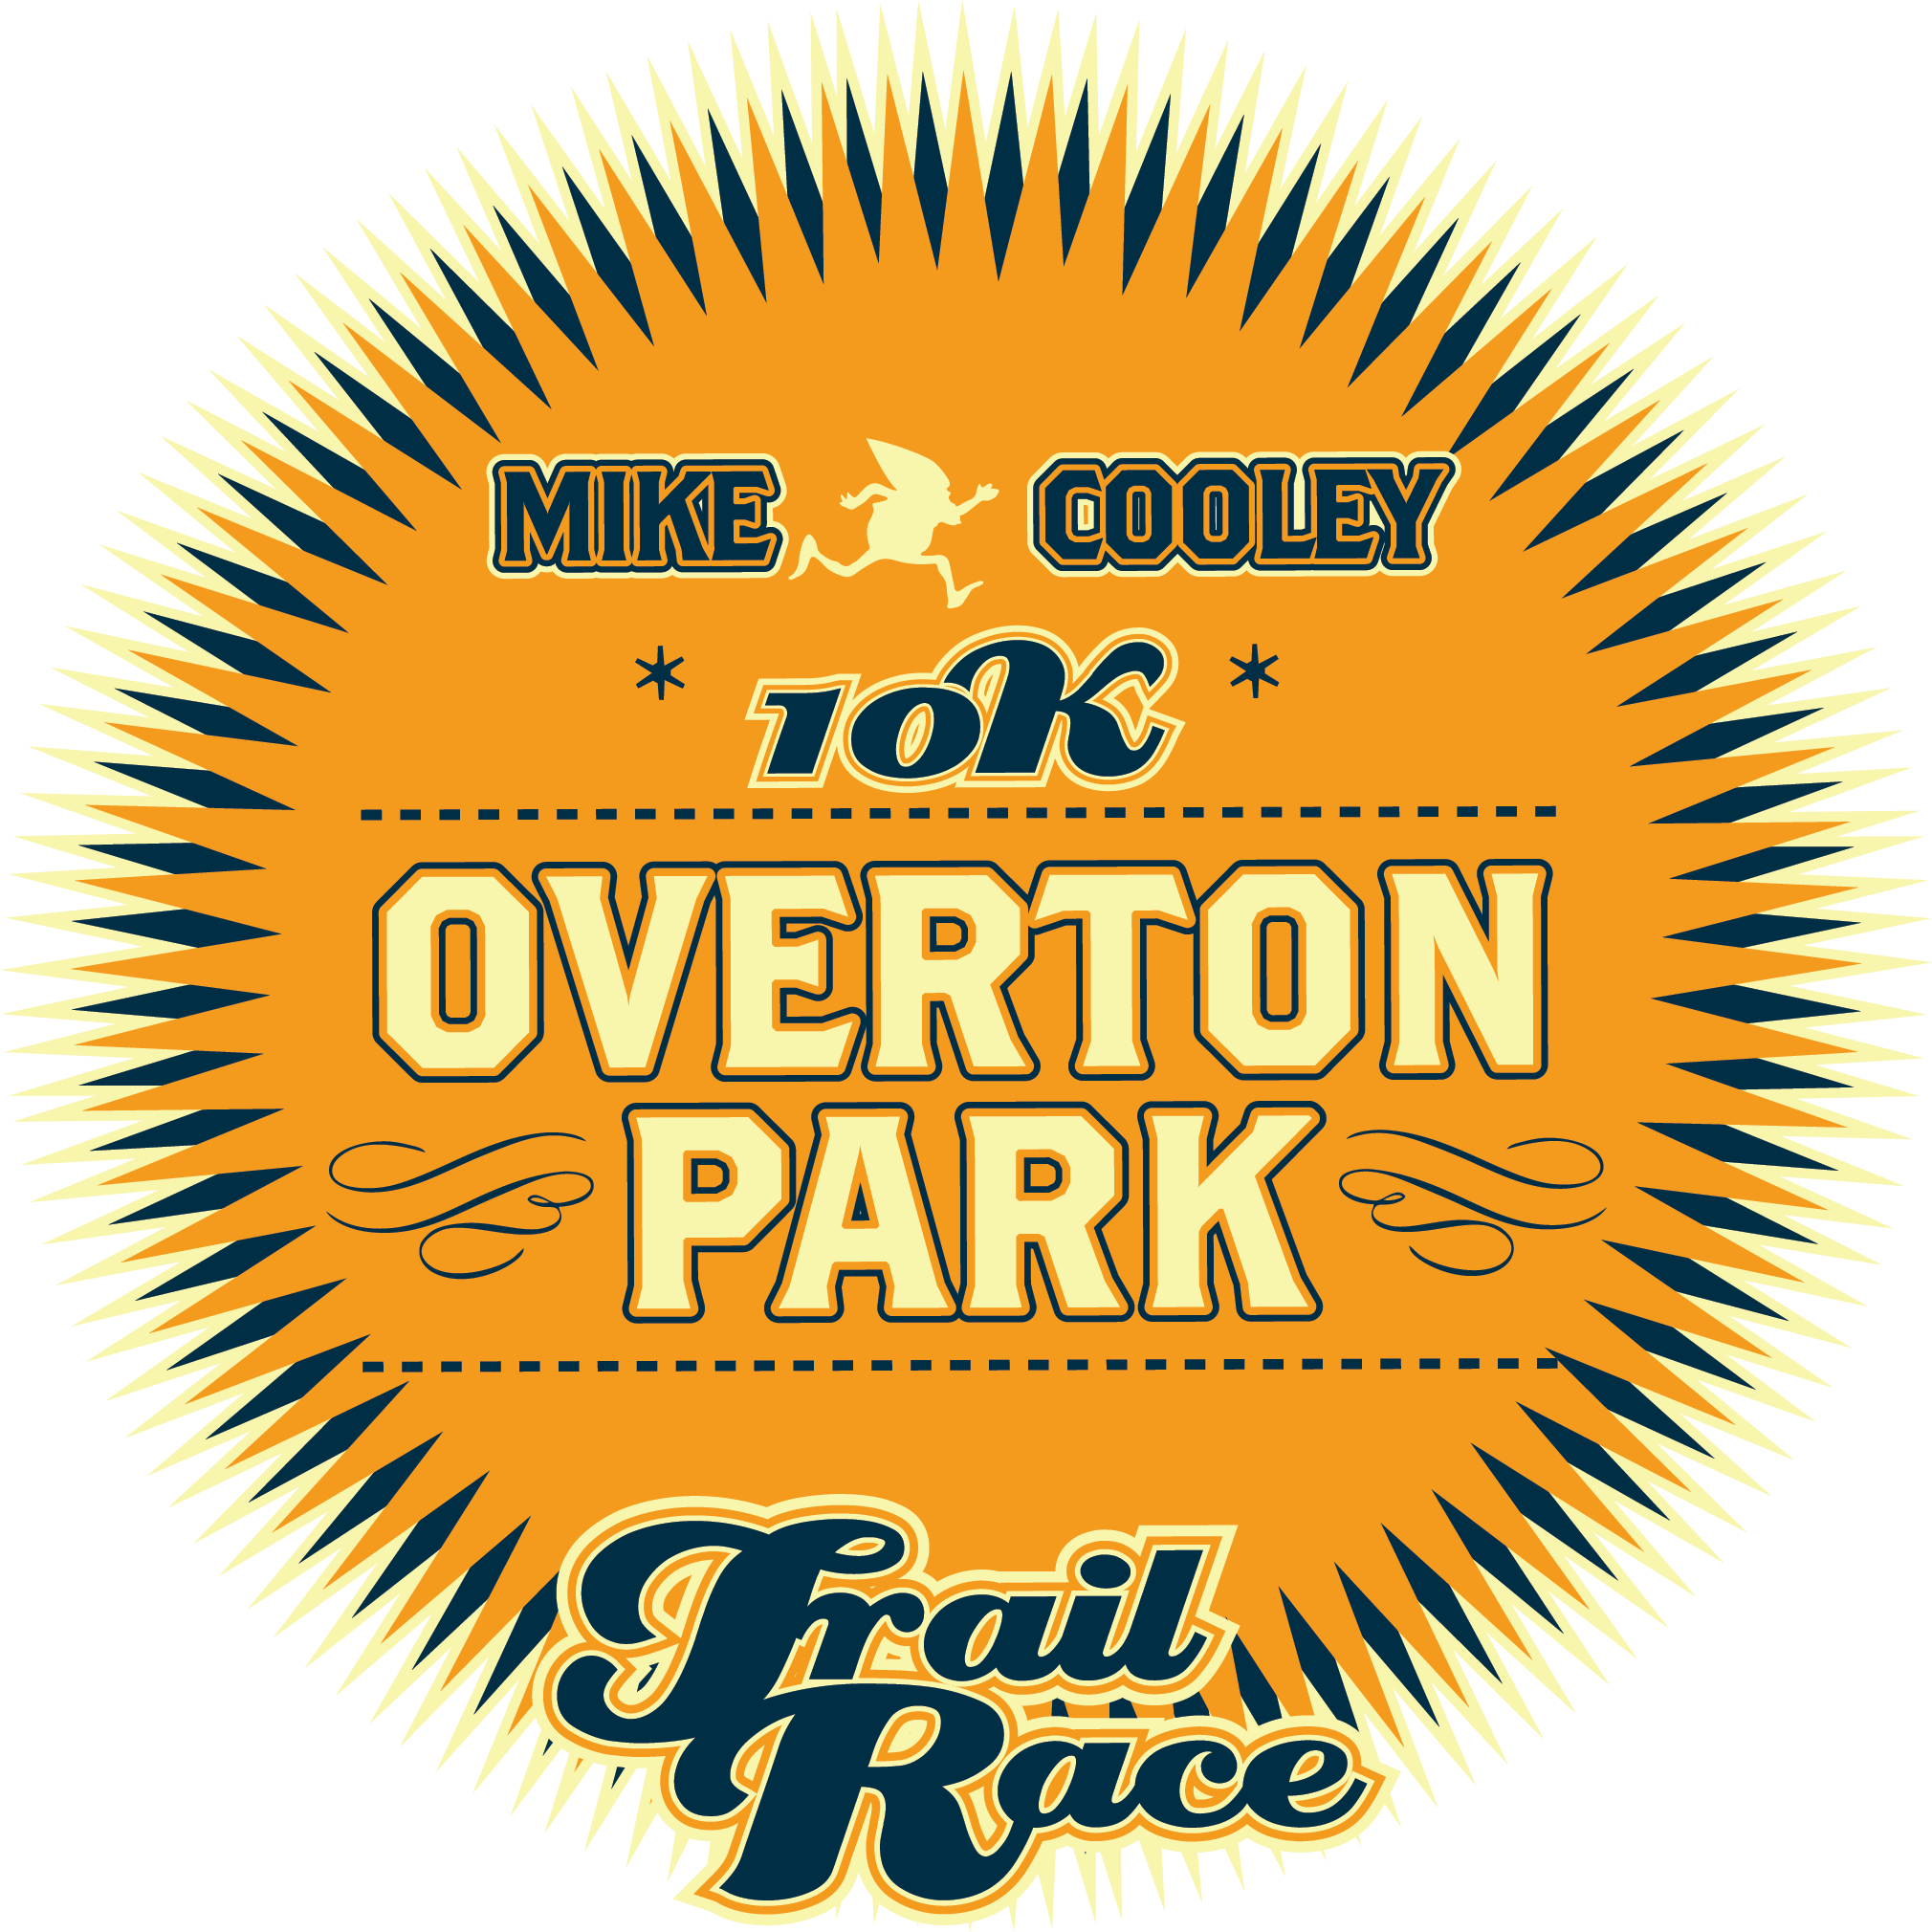 14th Annual Mike Cooley Overton Park 10K Trail Race